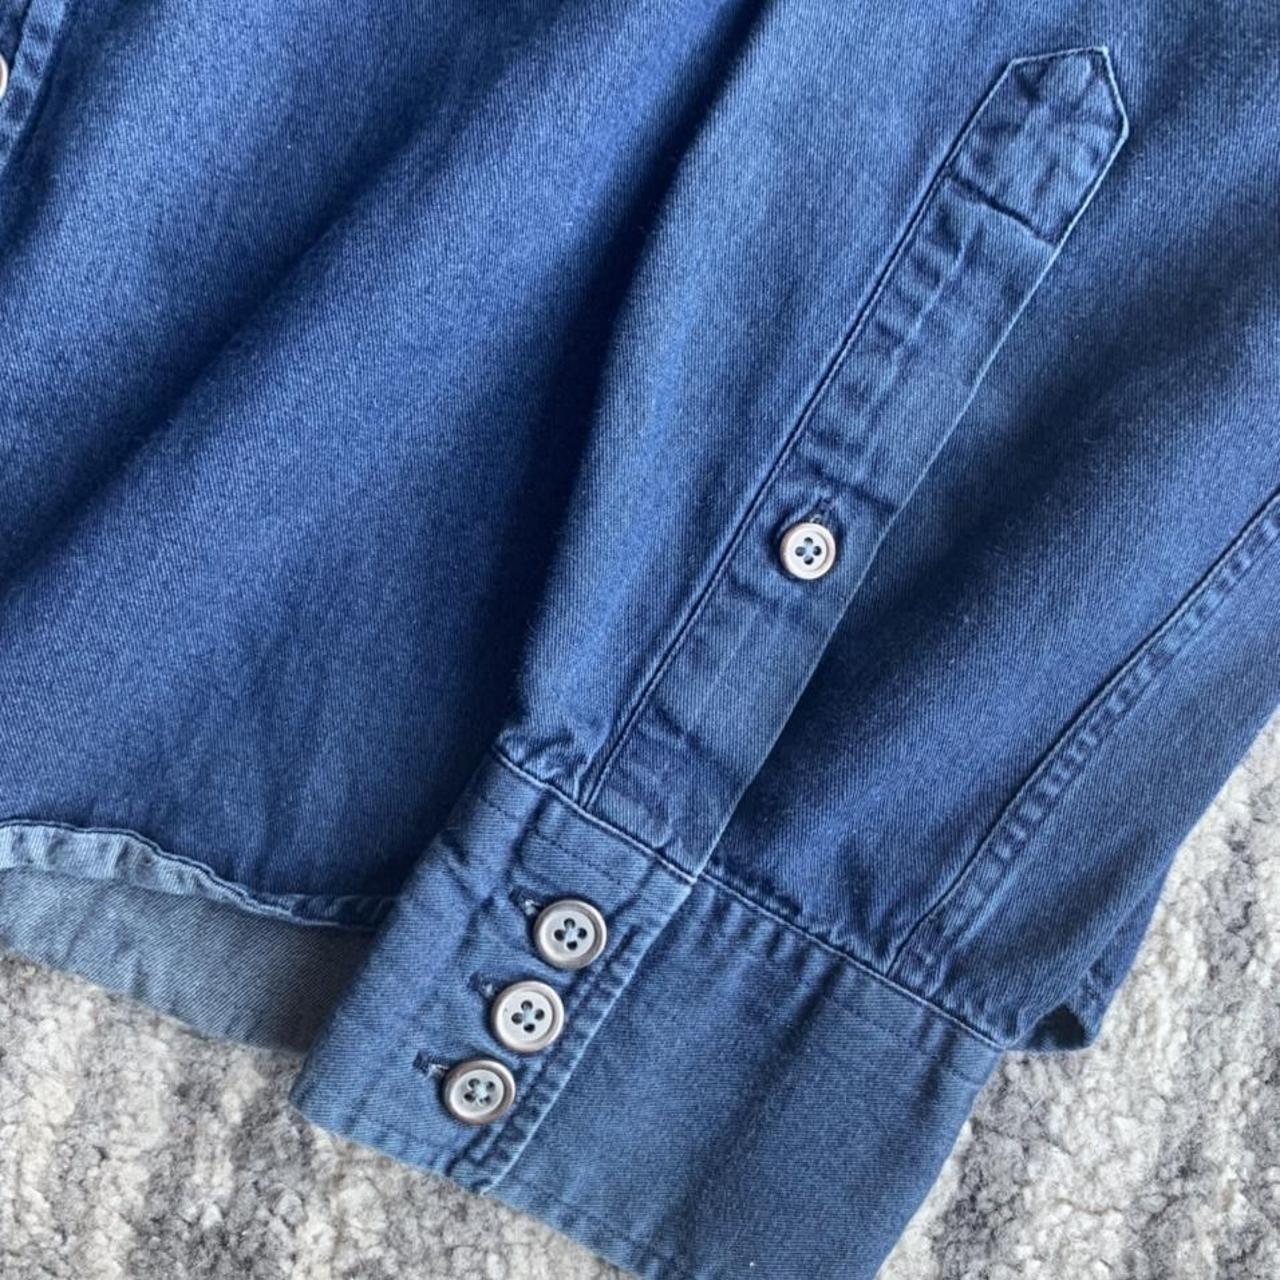 Acne jeans shirt - size small 48 - any questions... - Depop